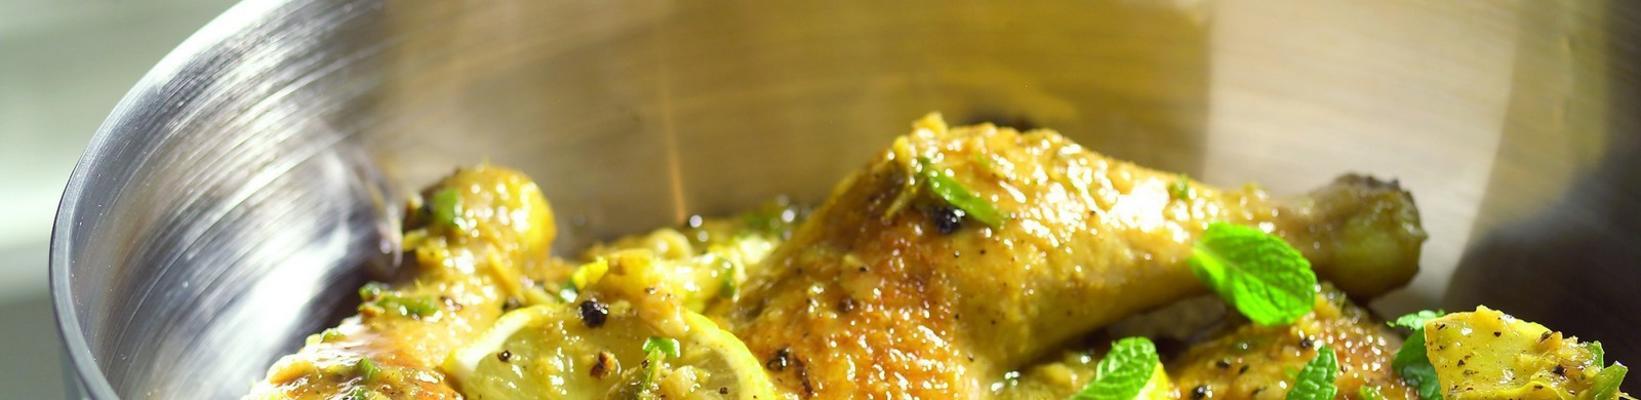 lemon chicken with parsley and mint